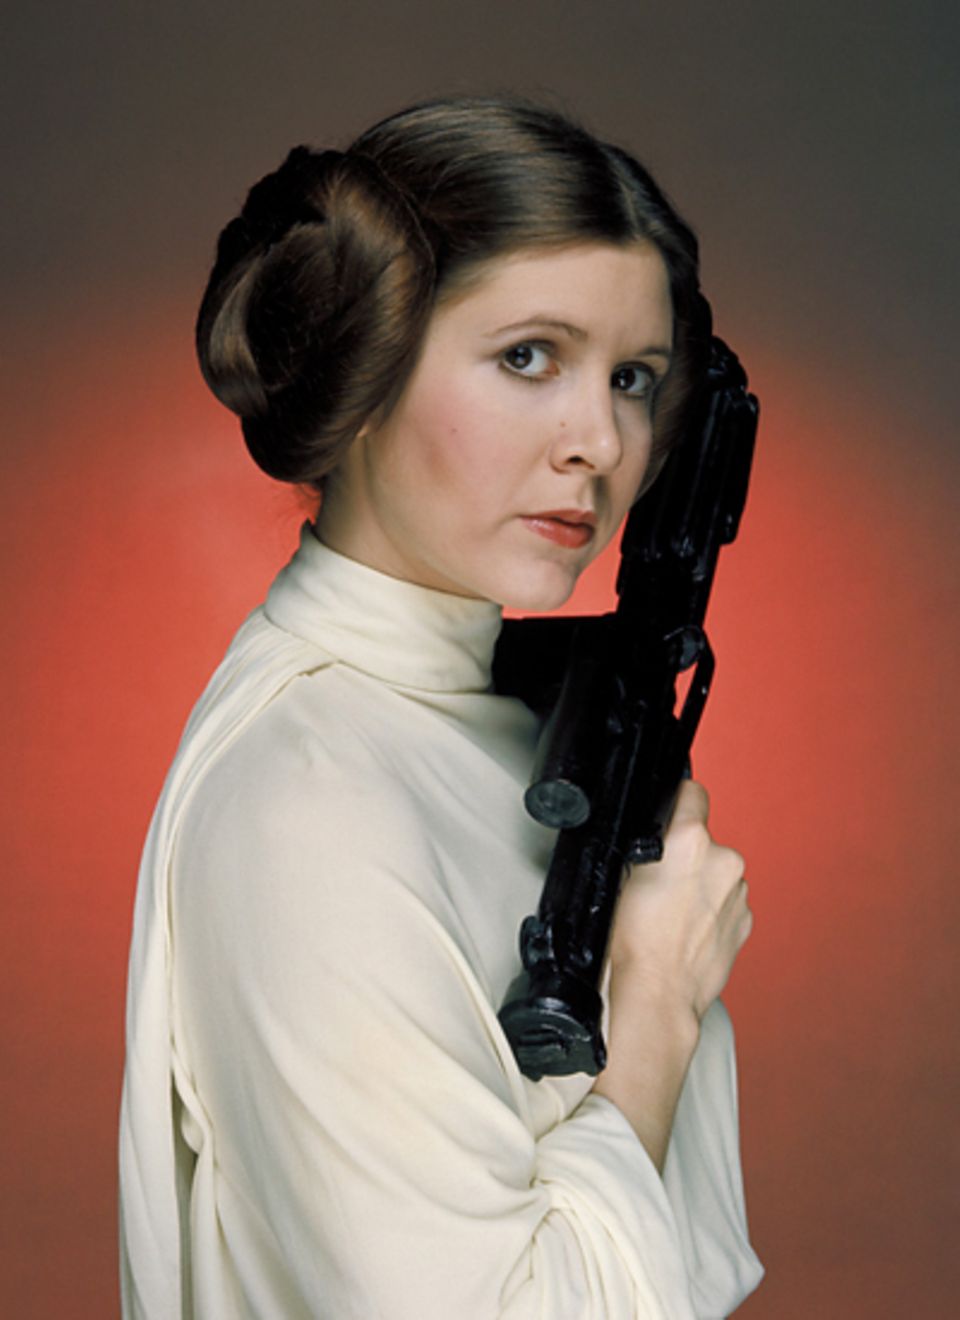 Carrie Fisher als Prinzessin Leia Organa in "Star Wars"